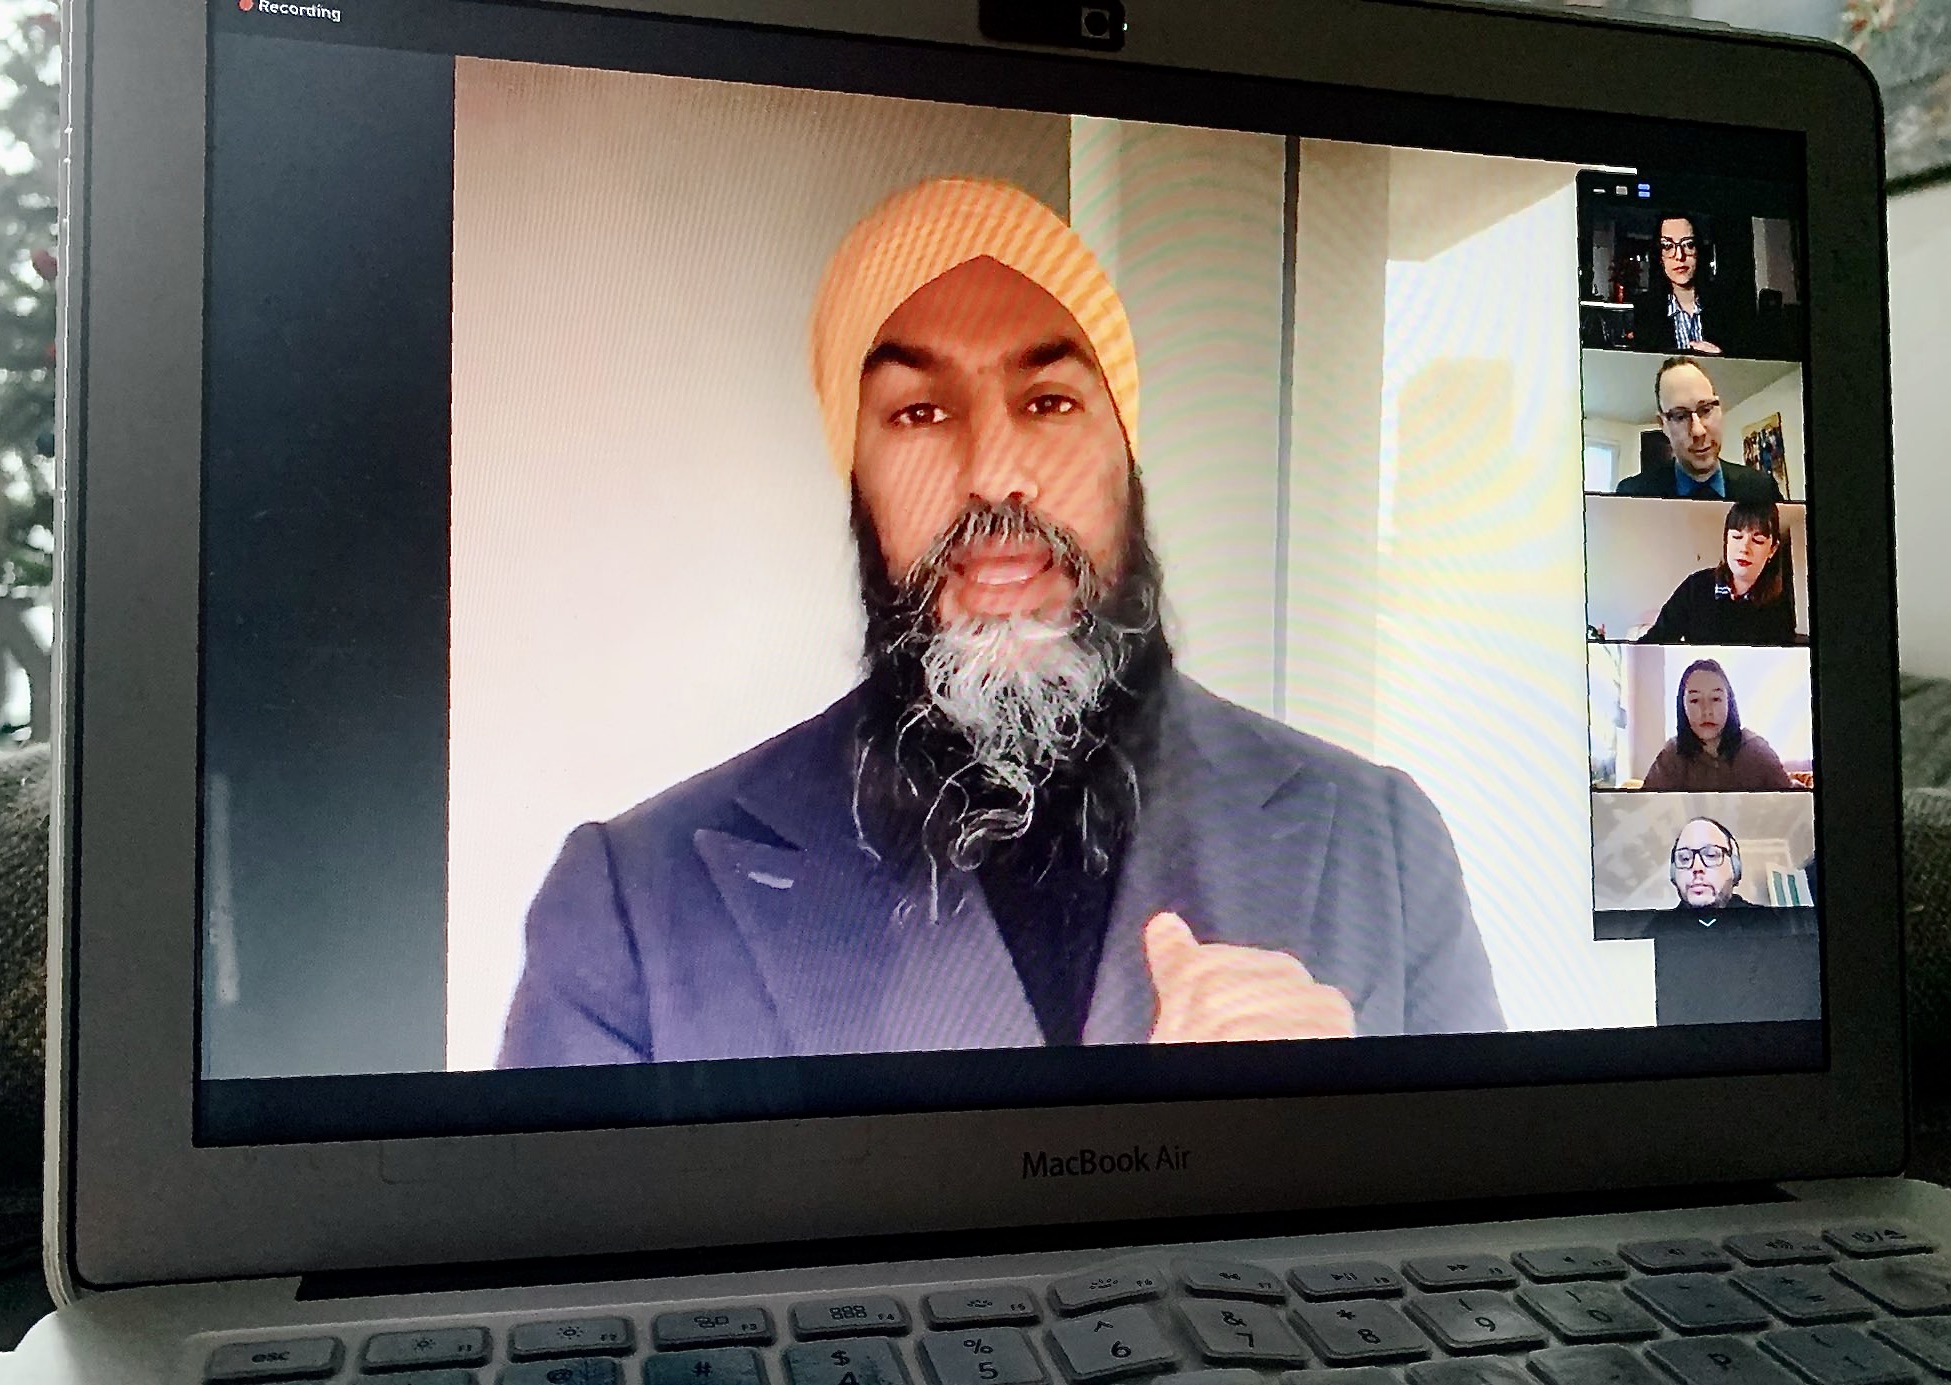 NDP leader Jagmeet Singh joined Algonquin College journalism students for a virtual press conference on Nov. 27.